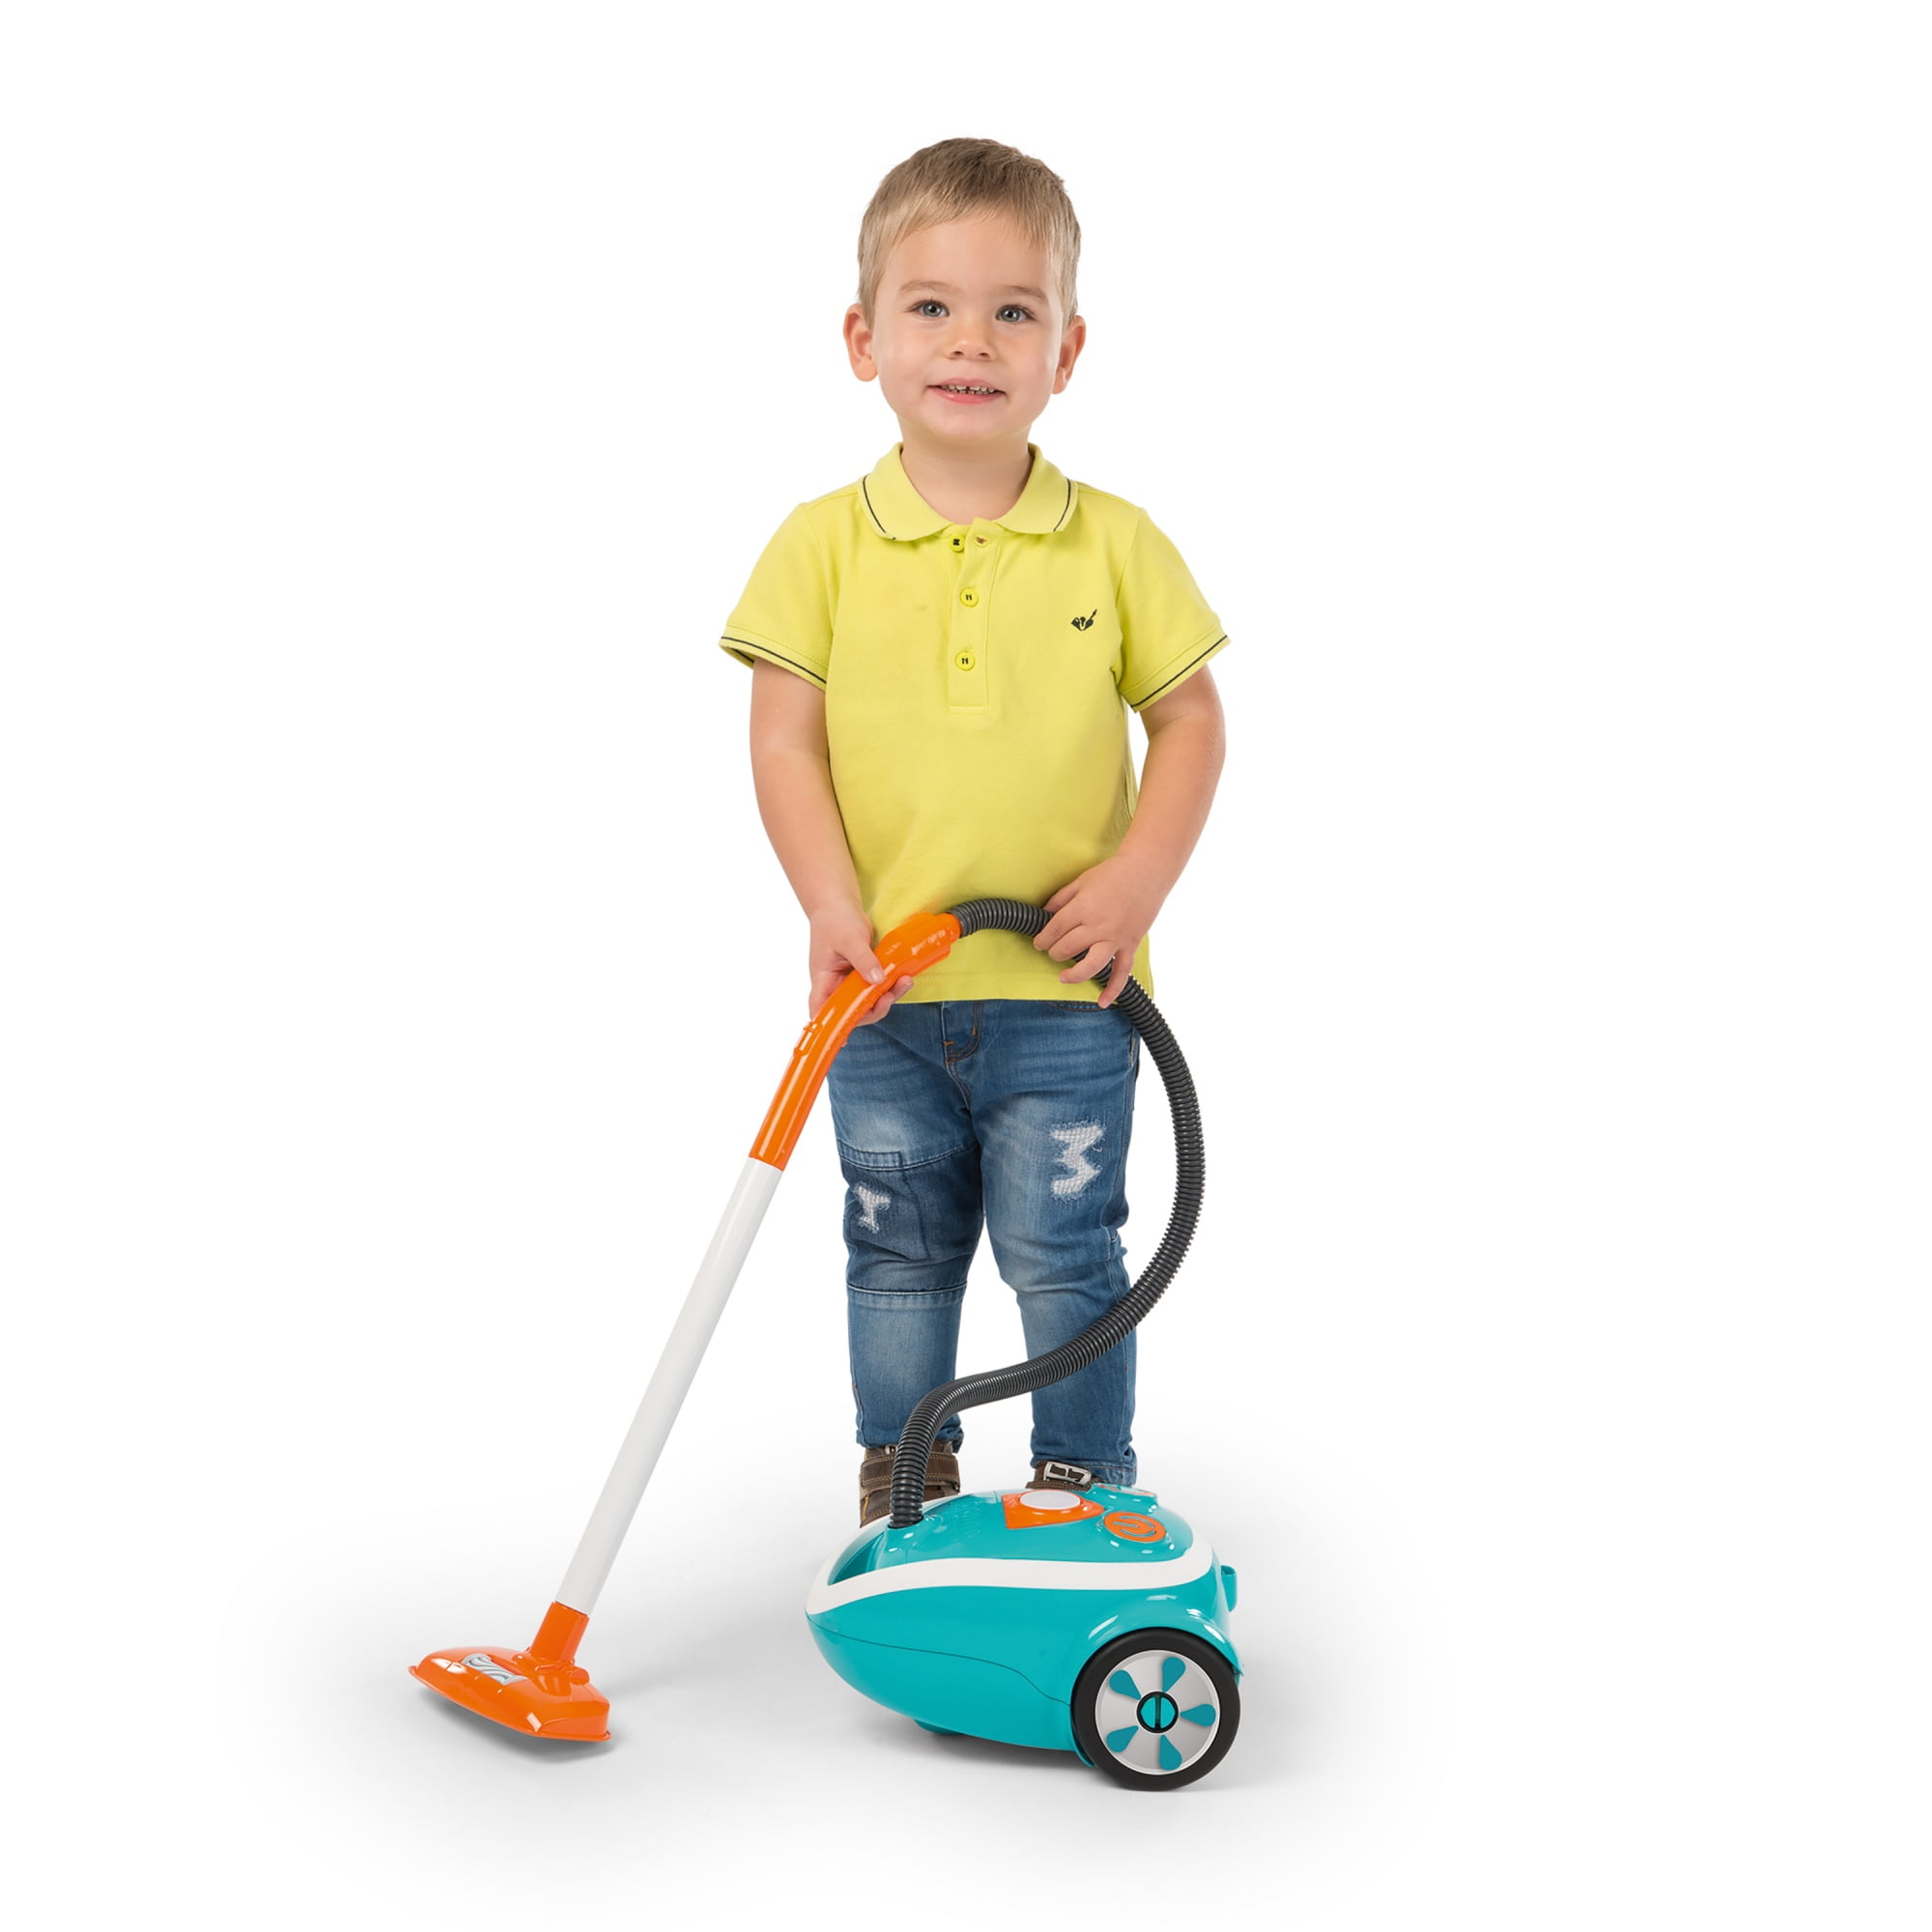 Smoby Kids Cleaning Play Pretend 3+ for Toy Trolley Ages